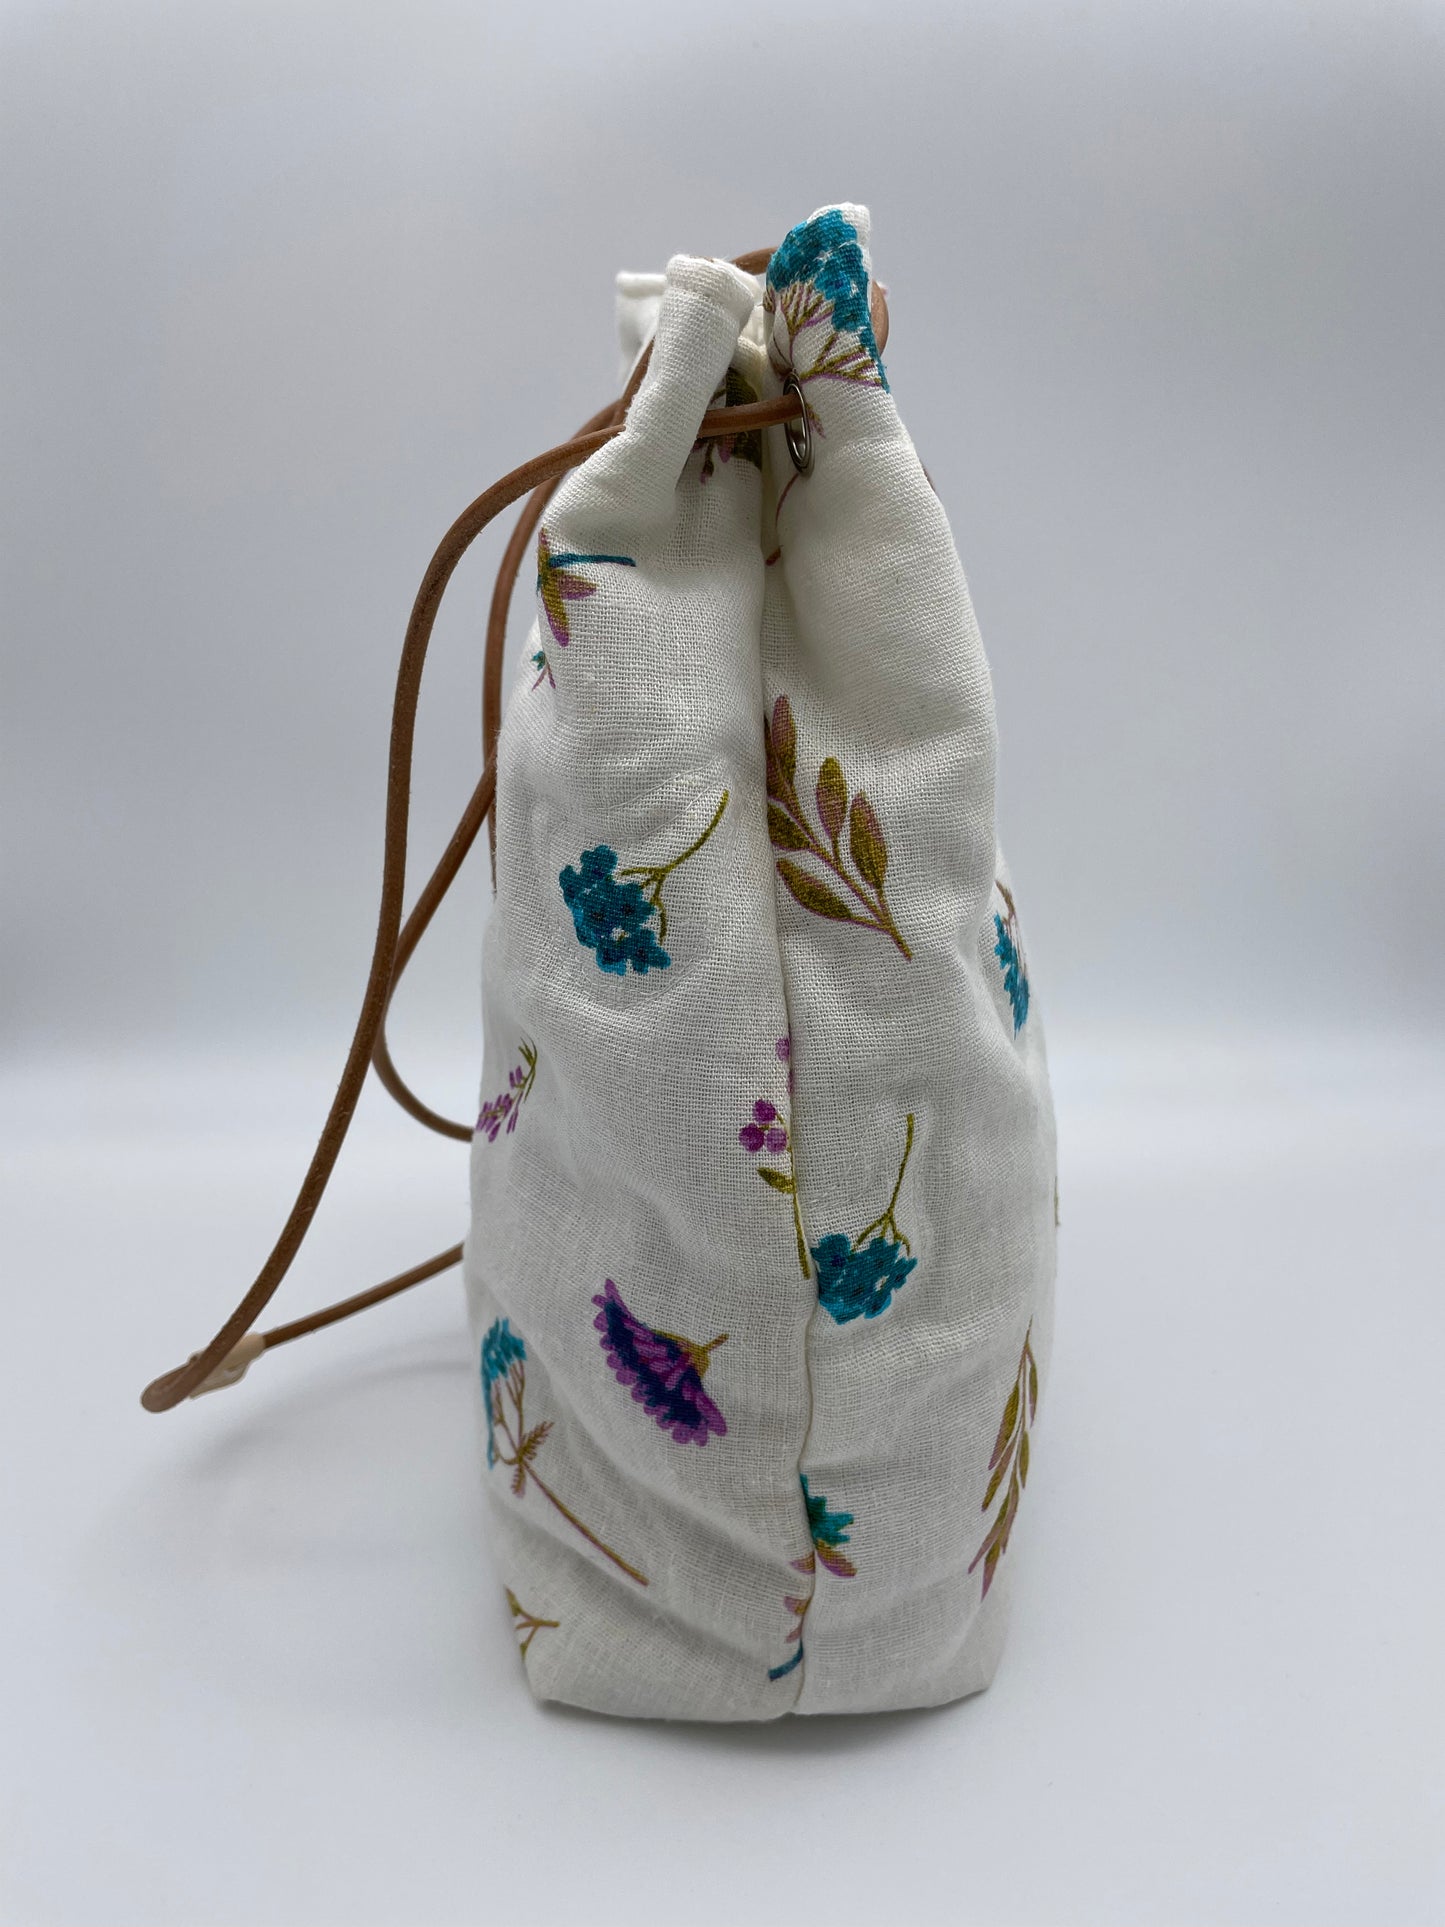 upcycled upcycling fabric bag handmade flower padded white side view